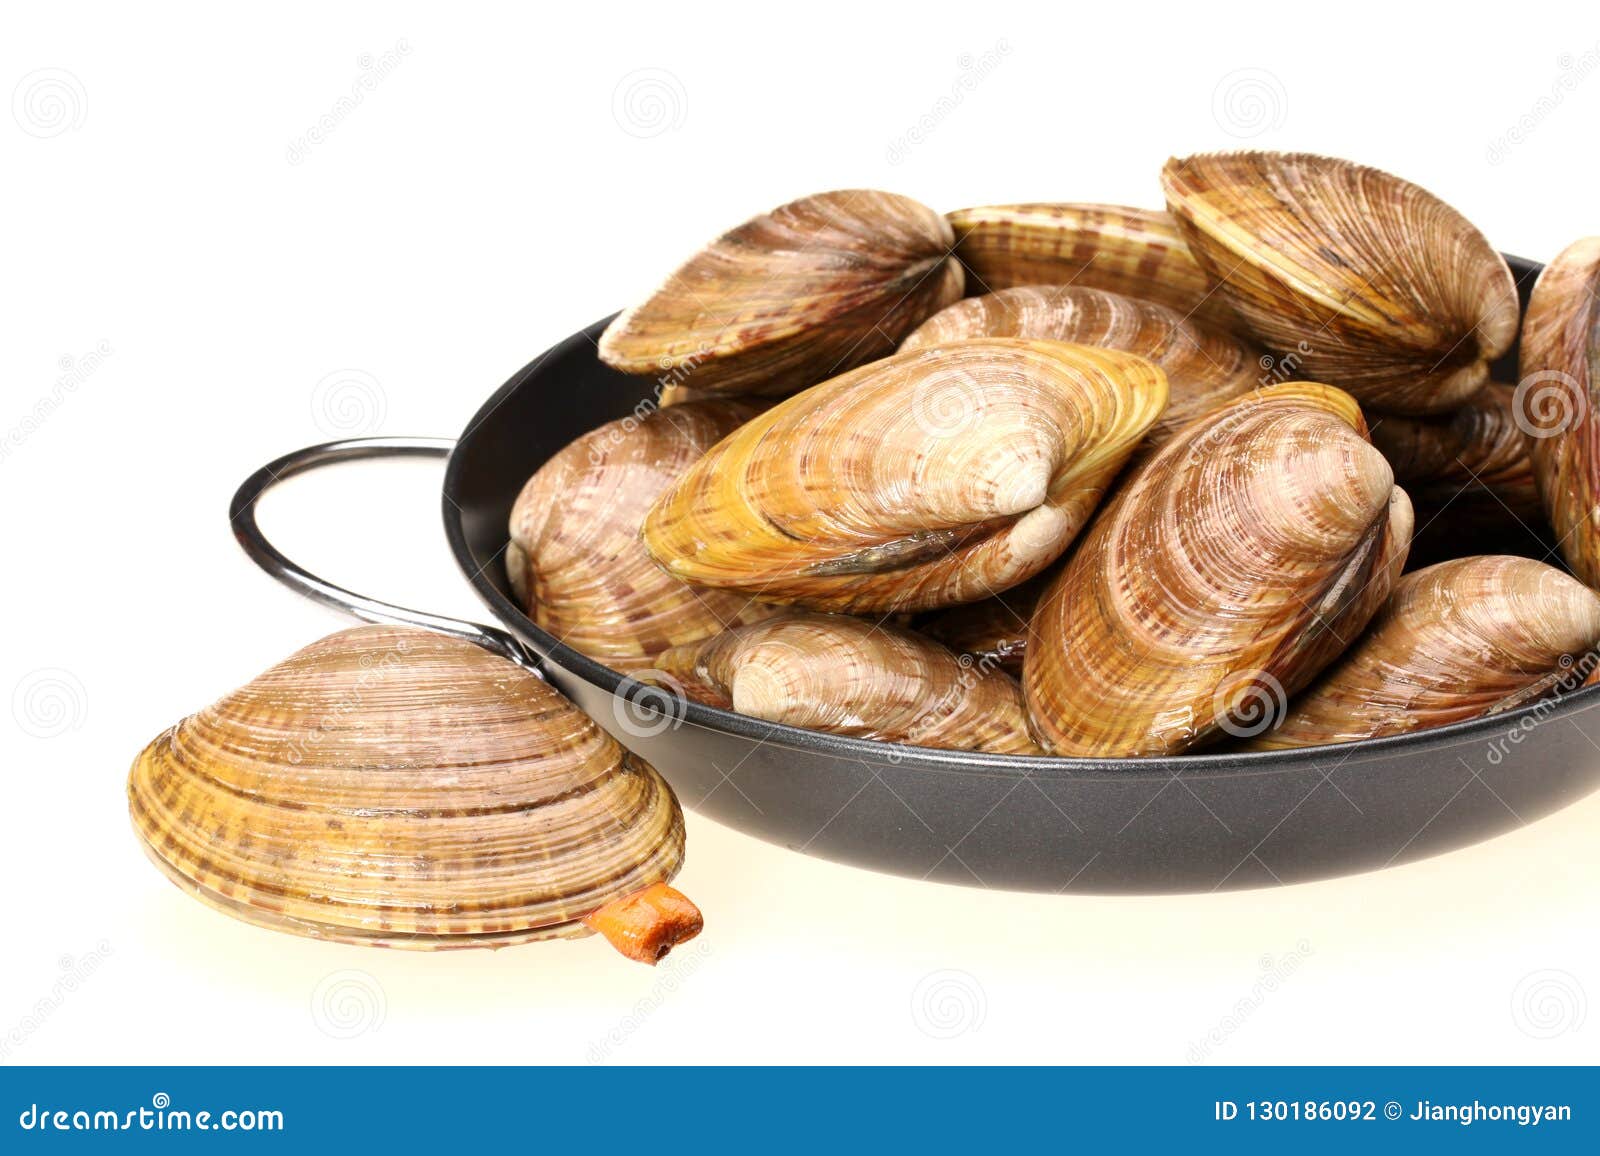 blanch clams